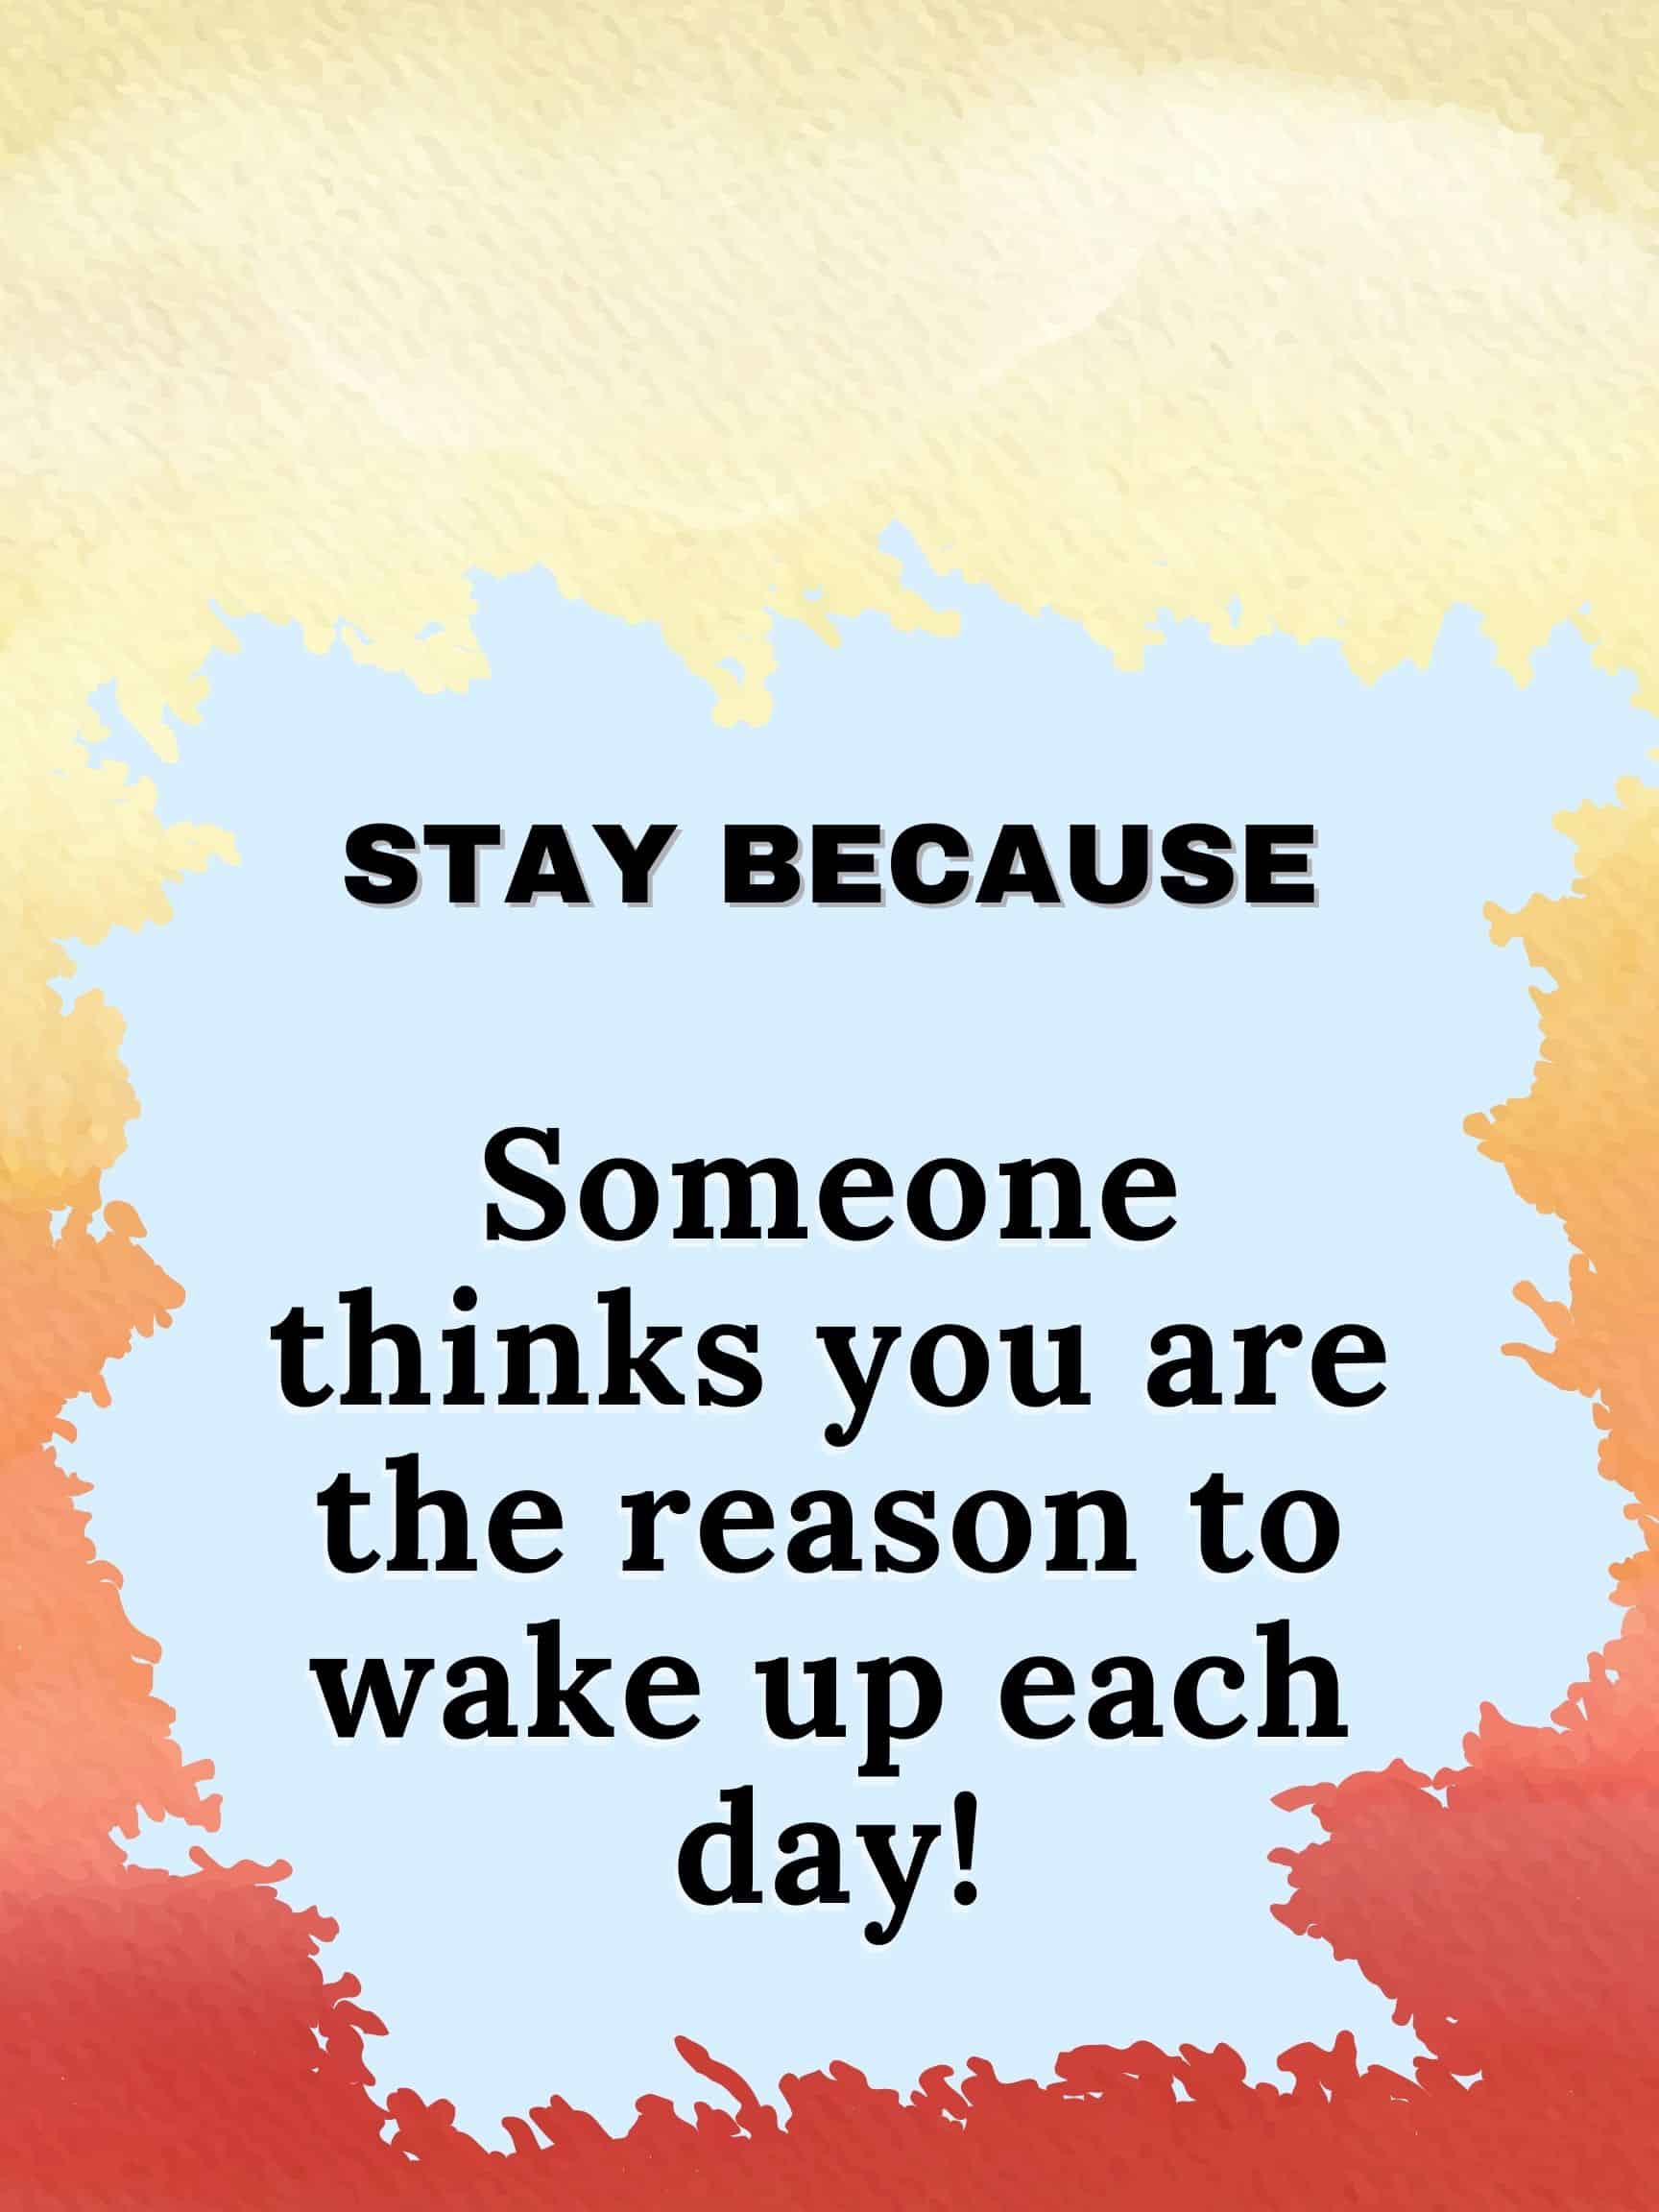 Stay because someone thinks you are the reason to wake up each day. #staybecause